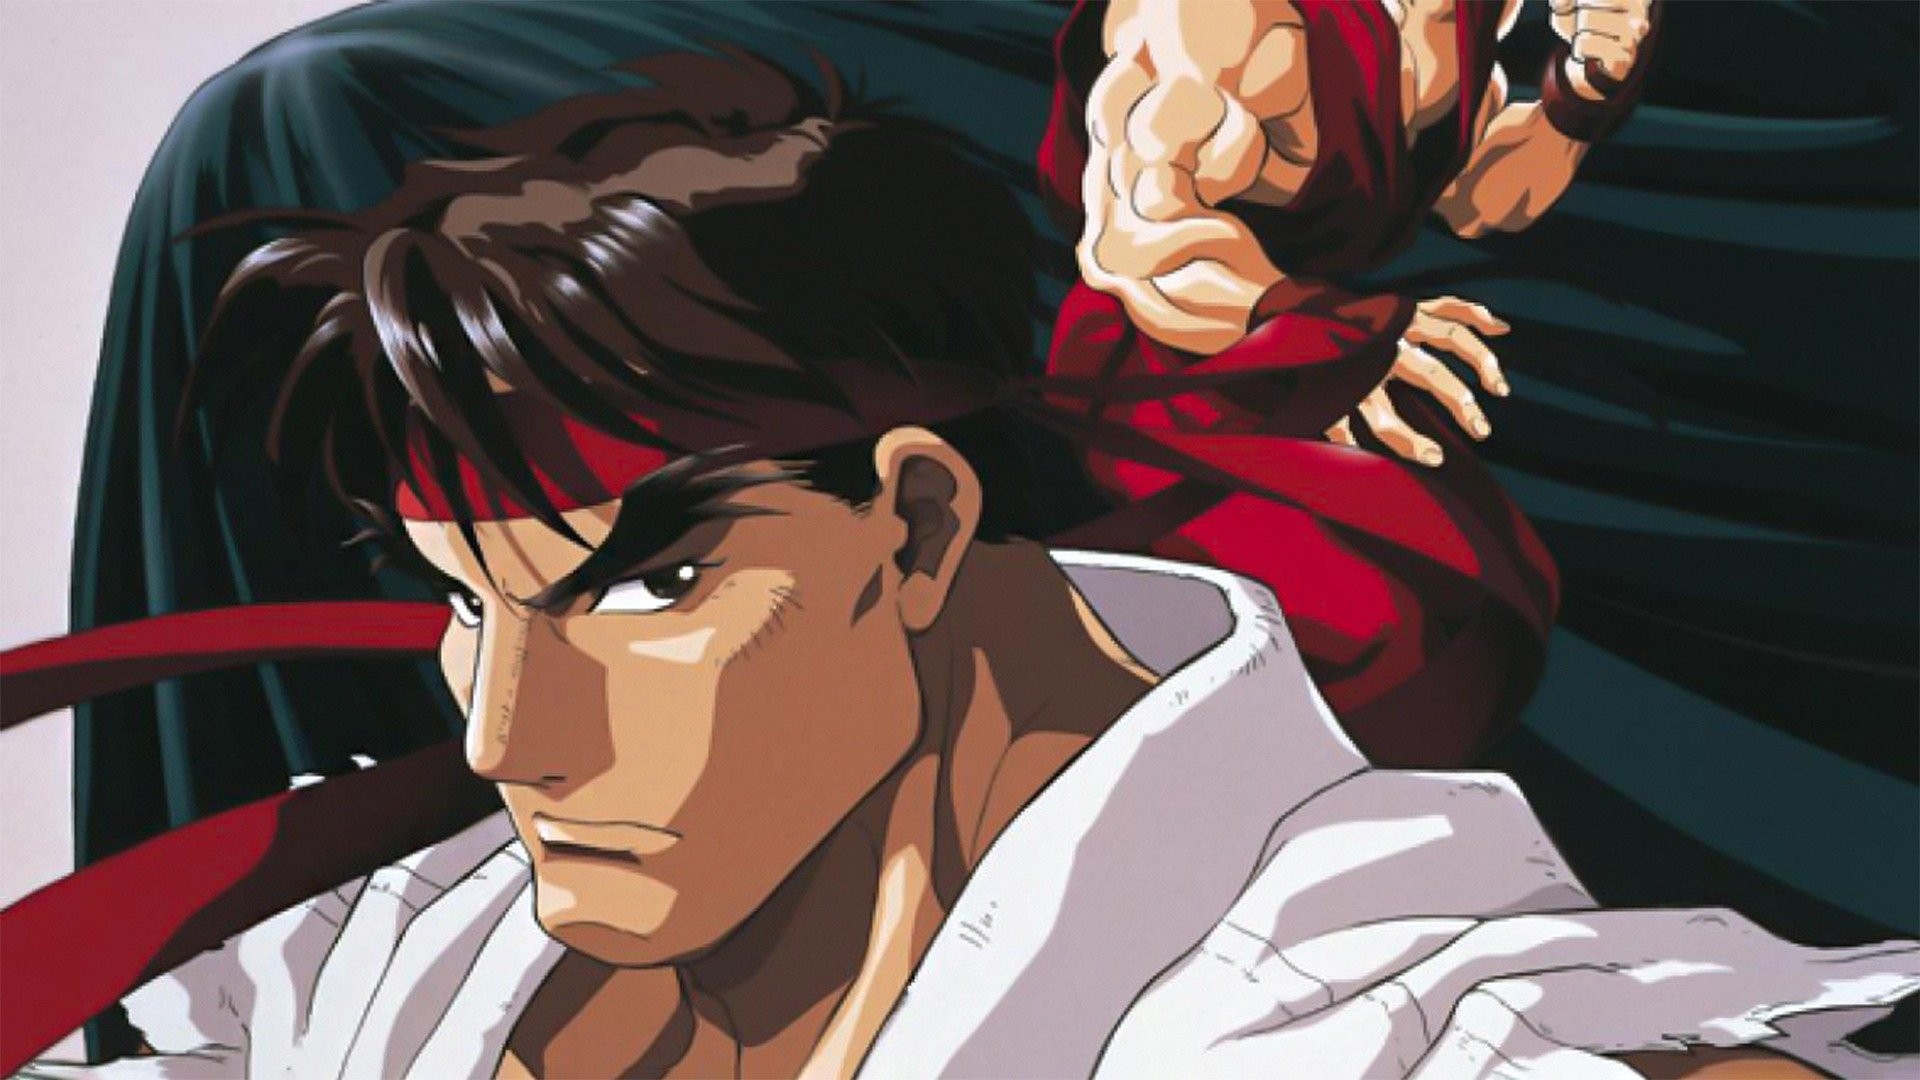 AMV - Street Fighter II: The Animated Movie - The Road (Ryu's